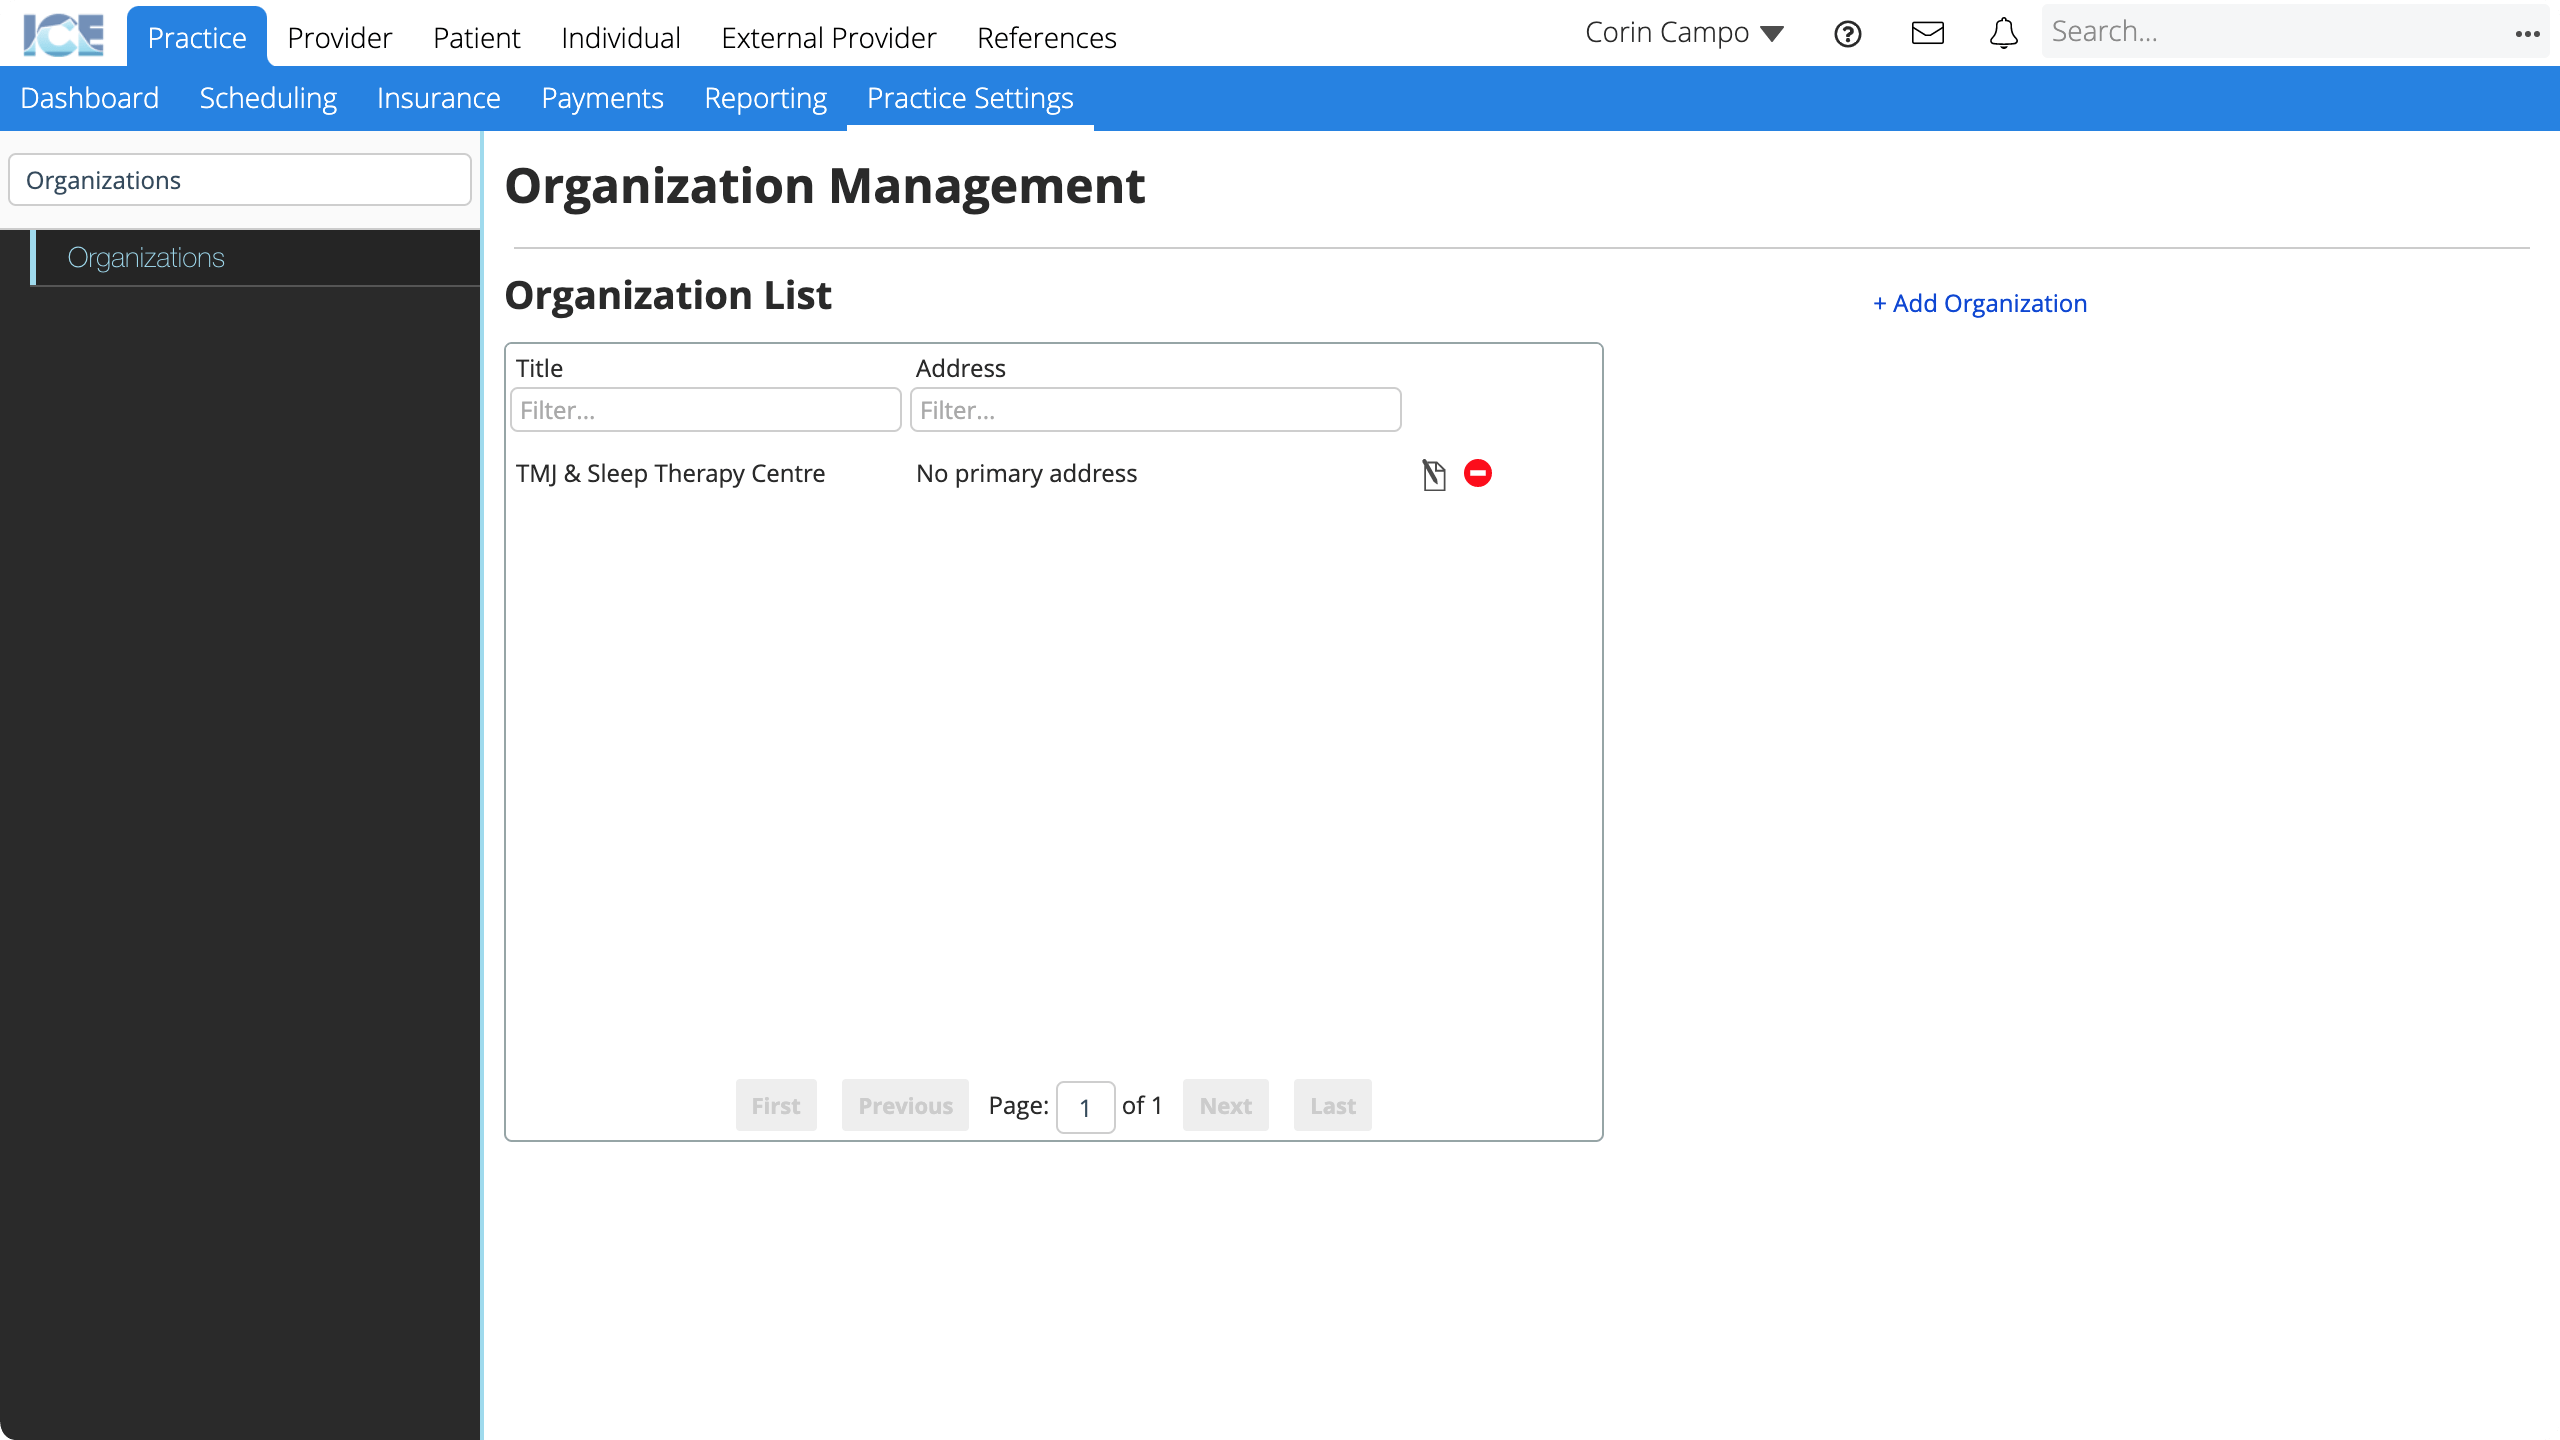 The add organization button is in the top right corner of the organization workspace.